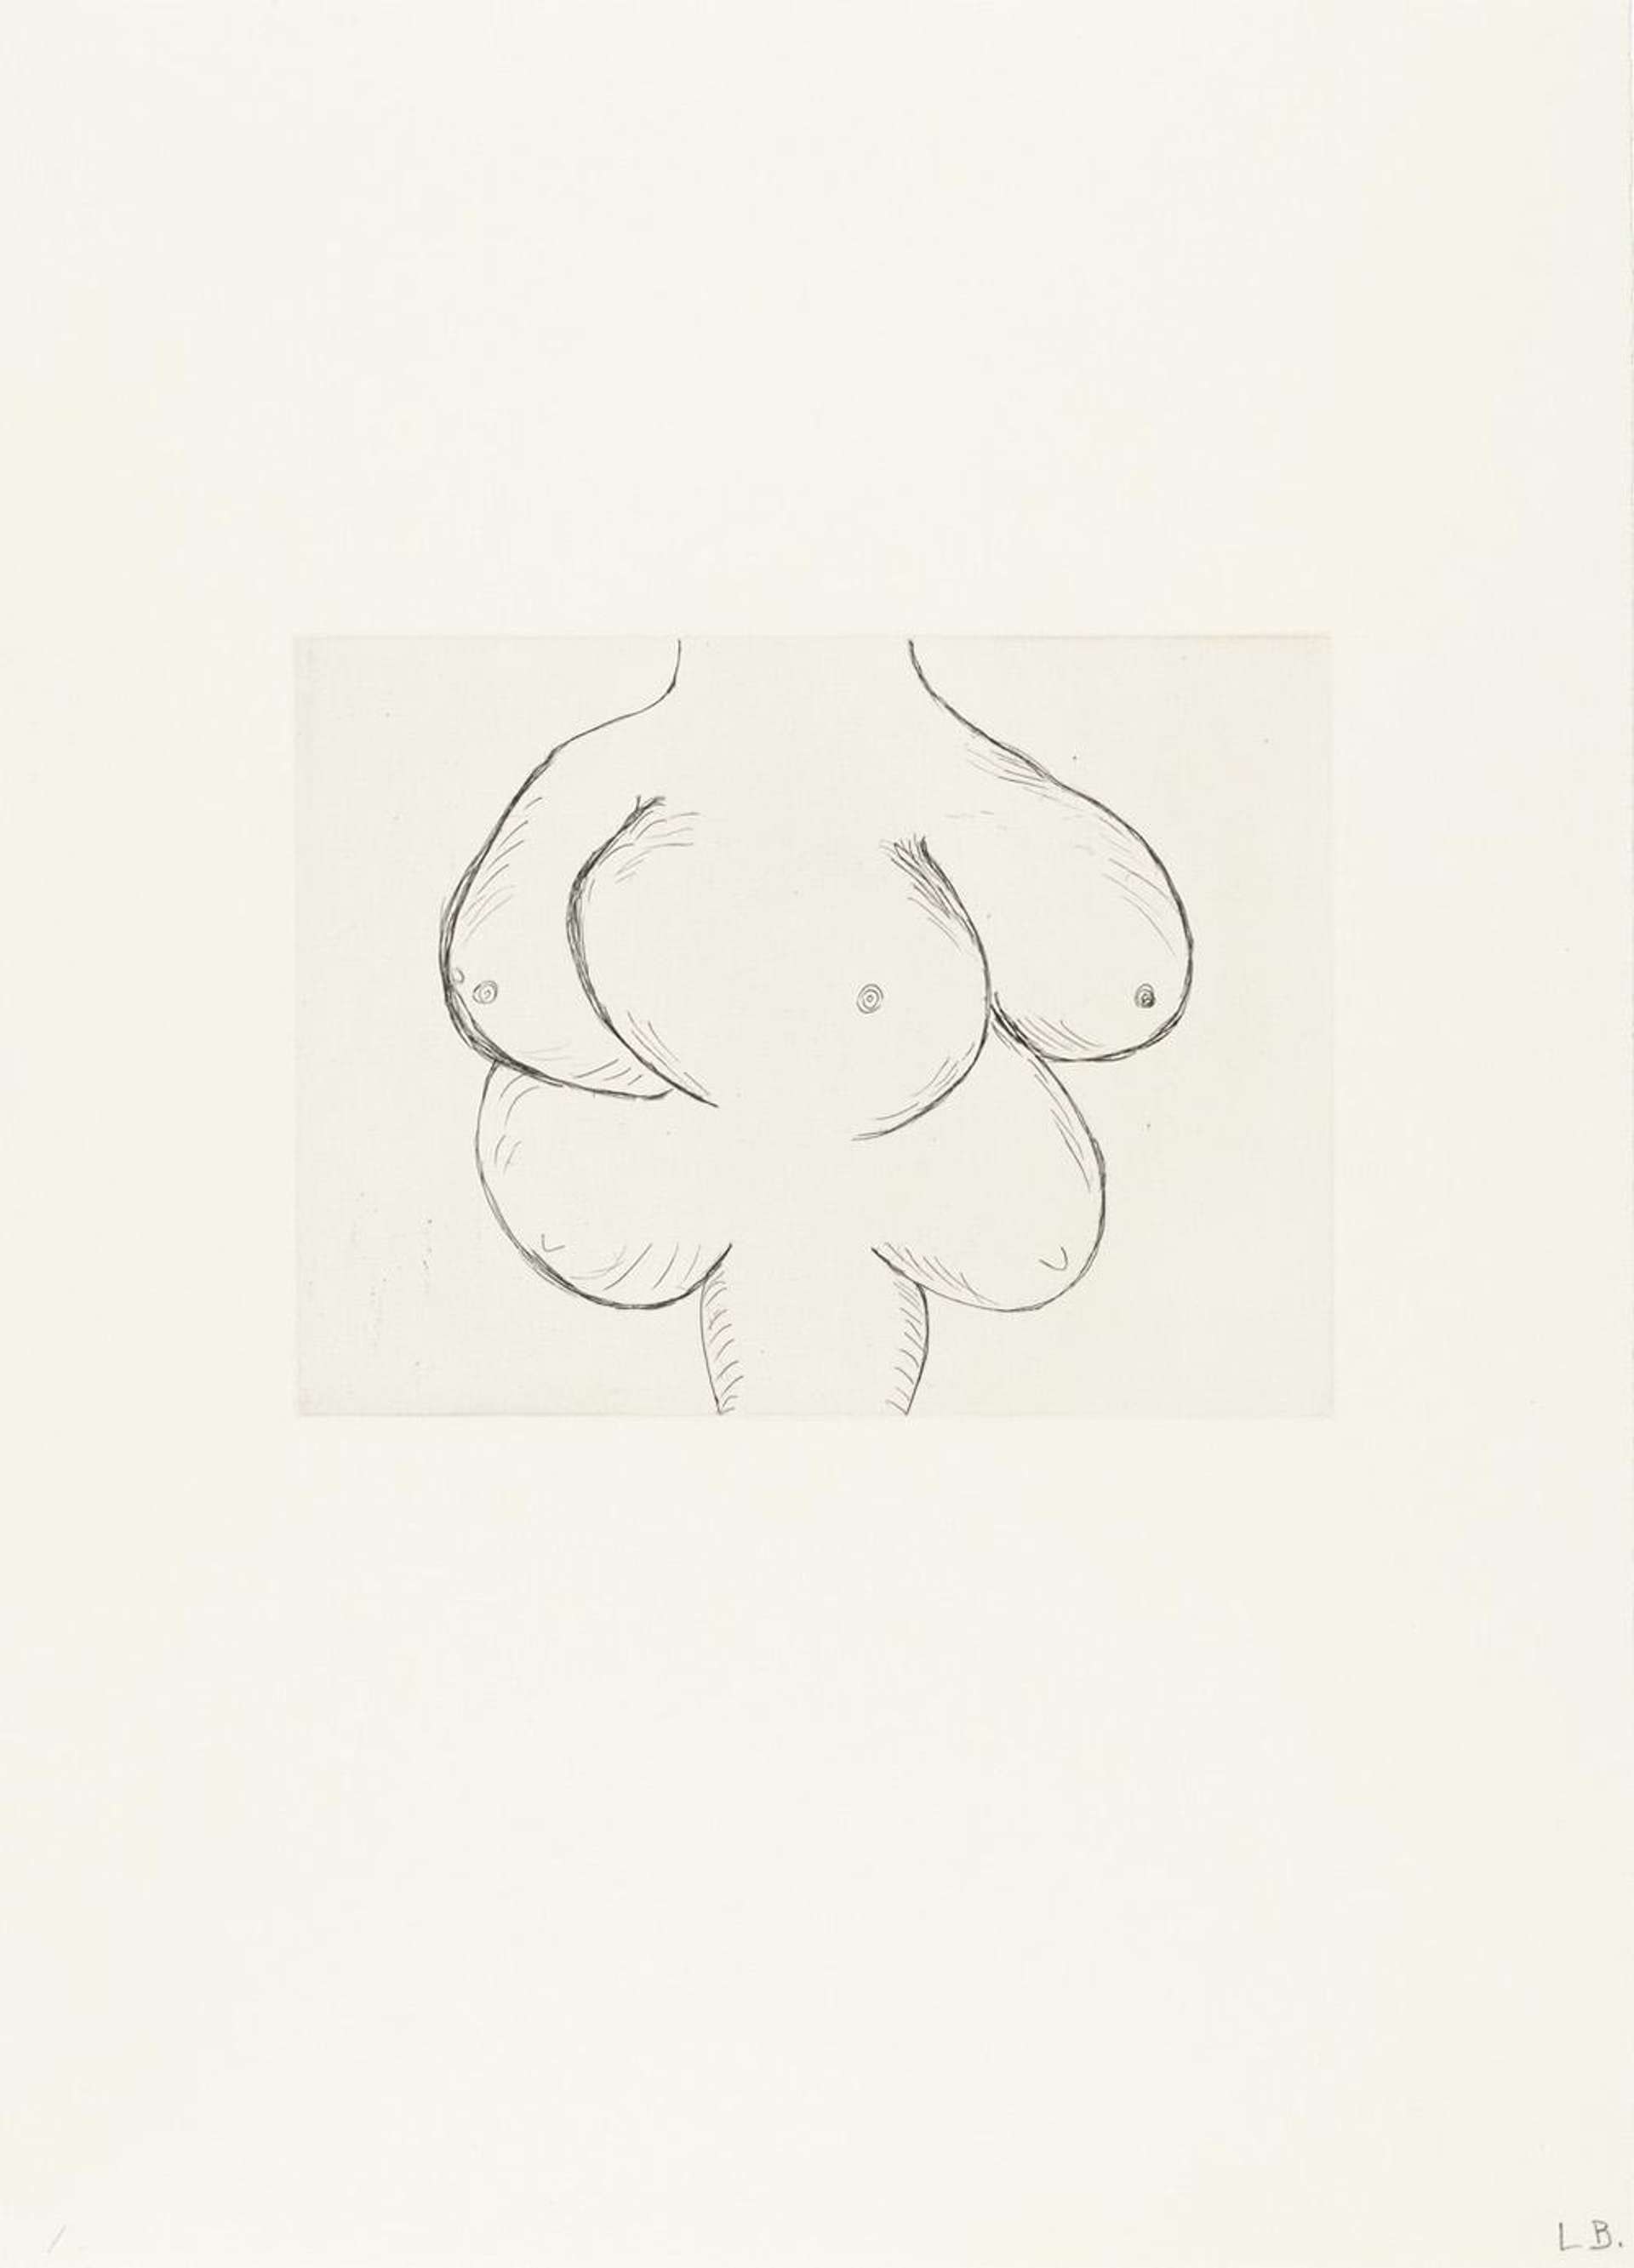 Louise Bourgeois Untitled No. 4. A monochromatic etching of an anatomical depiction of multiple breasts.